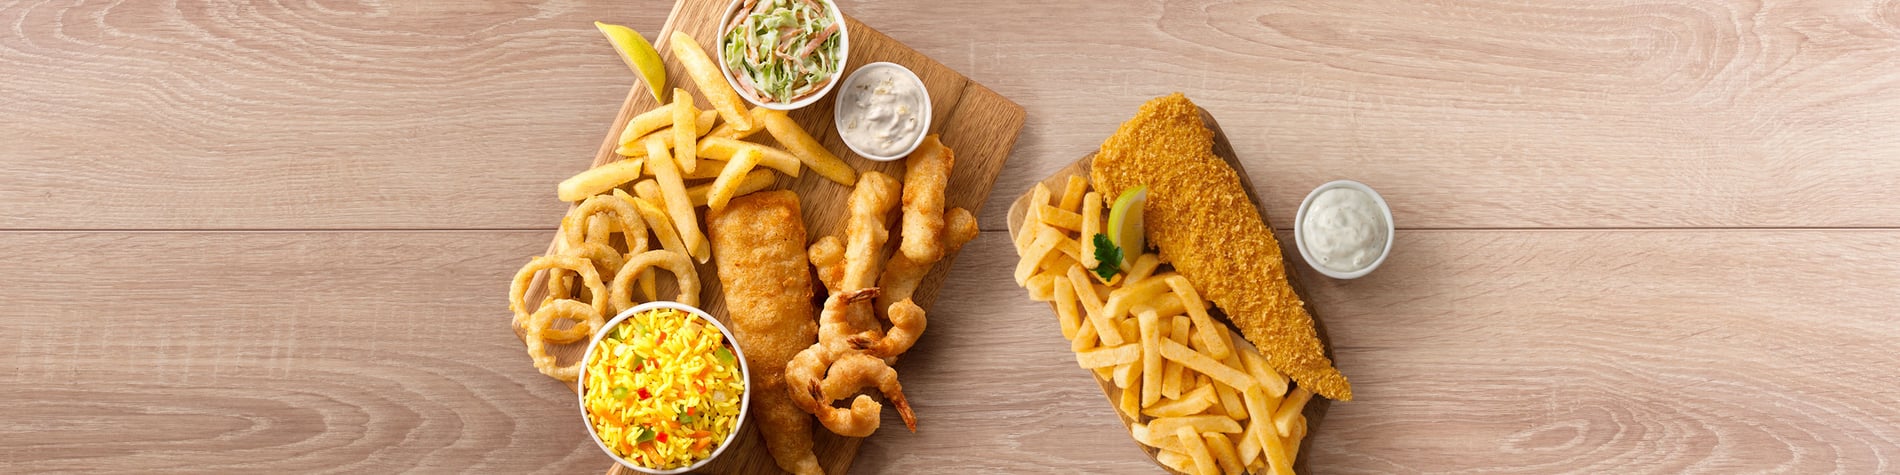 Seafood meals from Fishaways Total Volksrust including a Crunchy Fish and Chips meal and a seafood Platter for One with hake, calamari, prawns, chips, onion rings, and coleslaw.